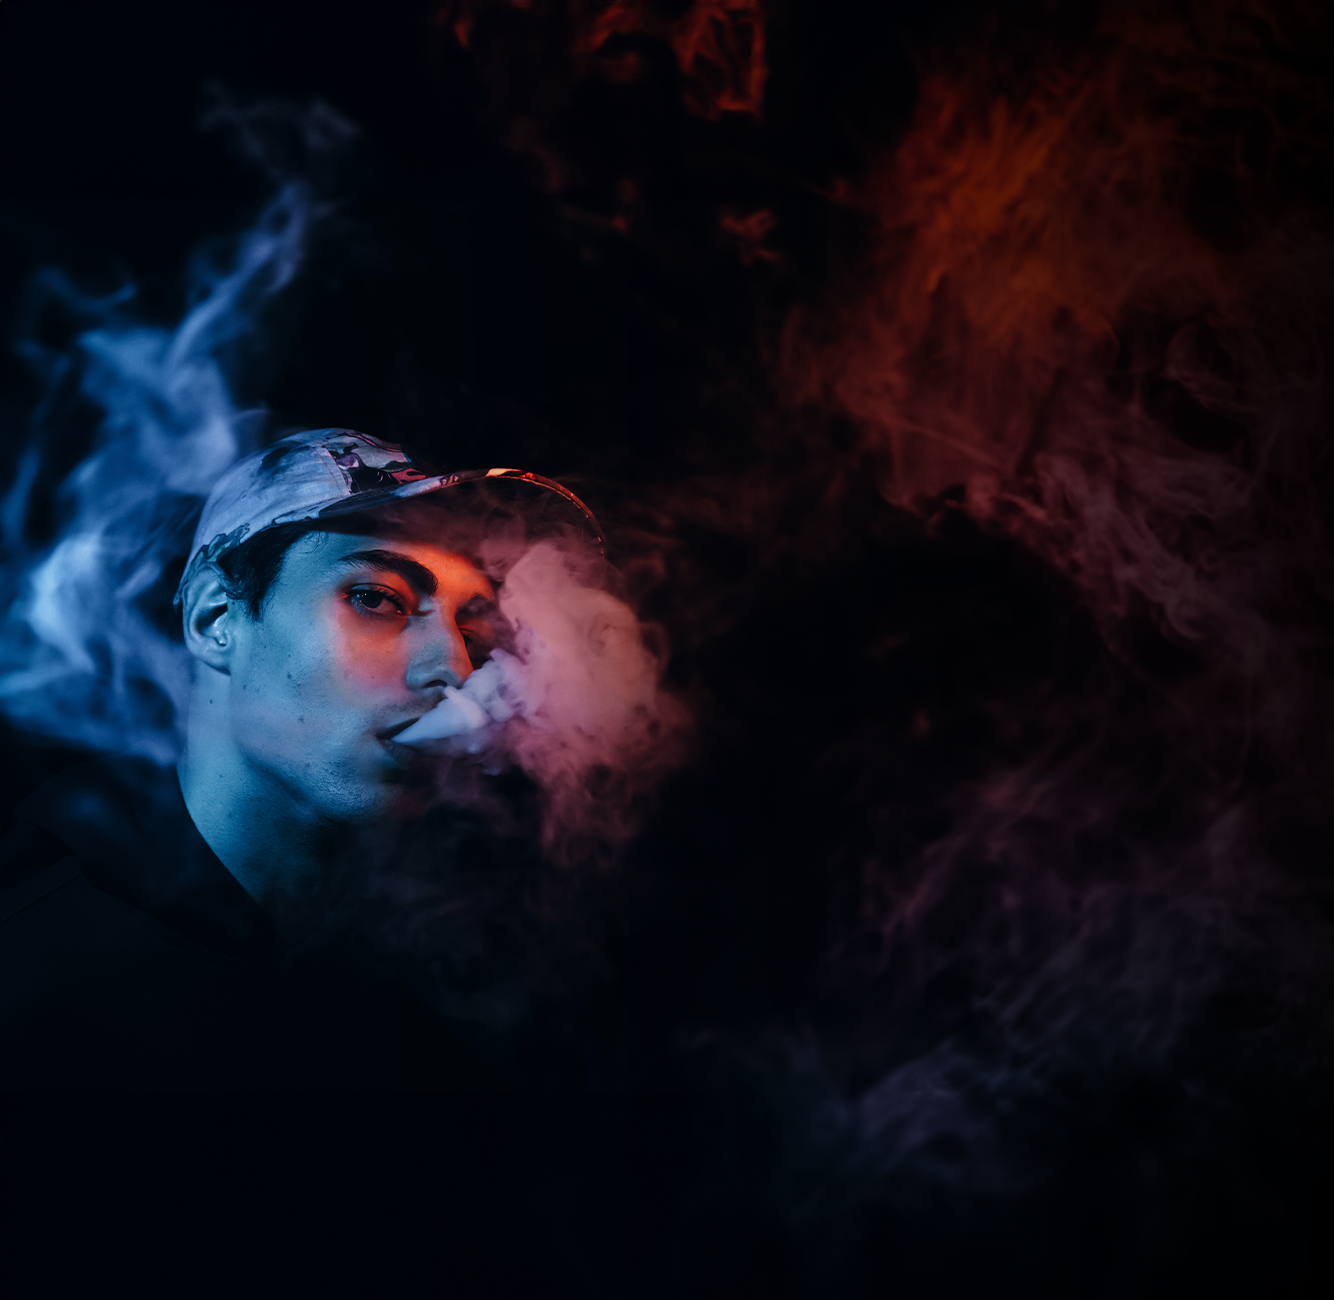 Vaping-image-extended-2.png#asset:94099